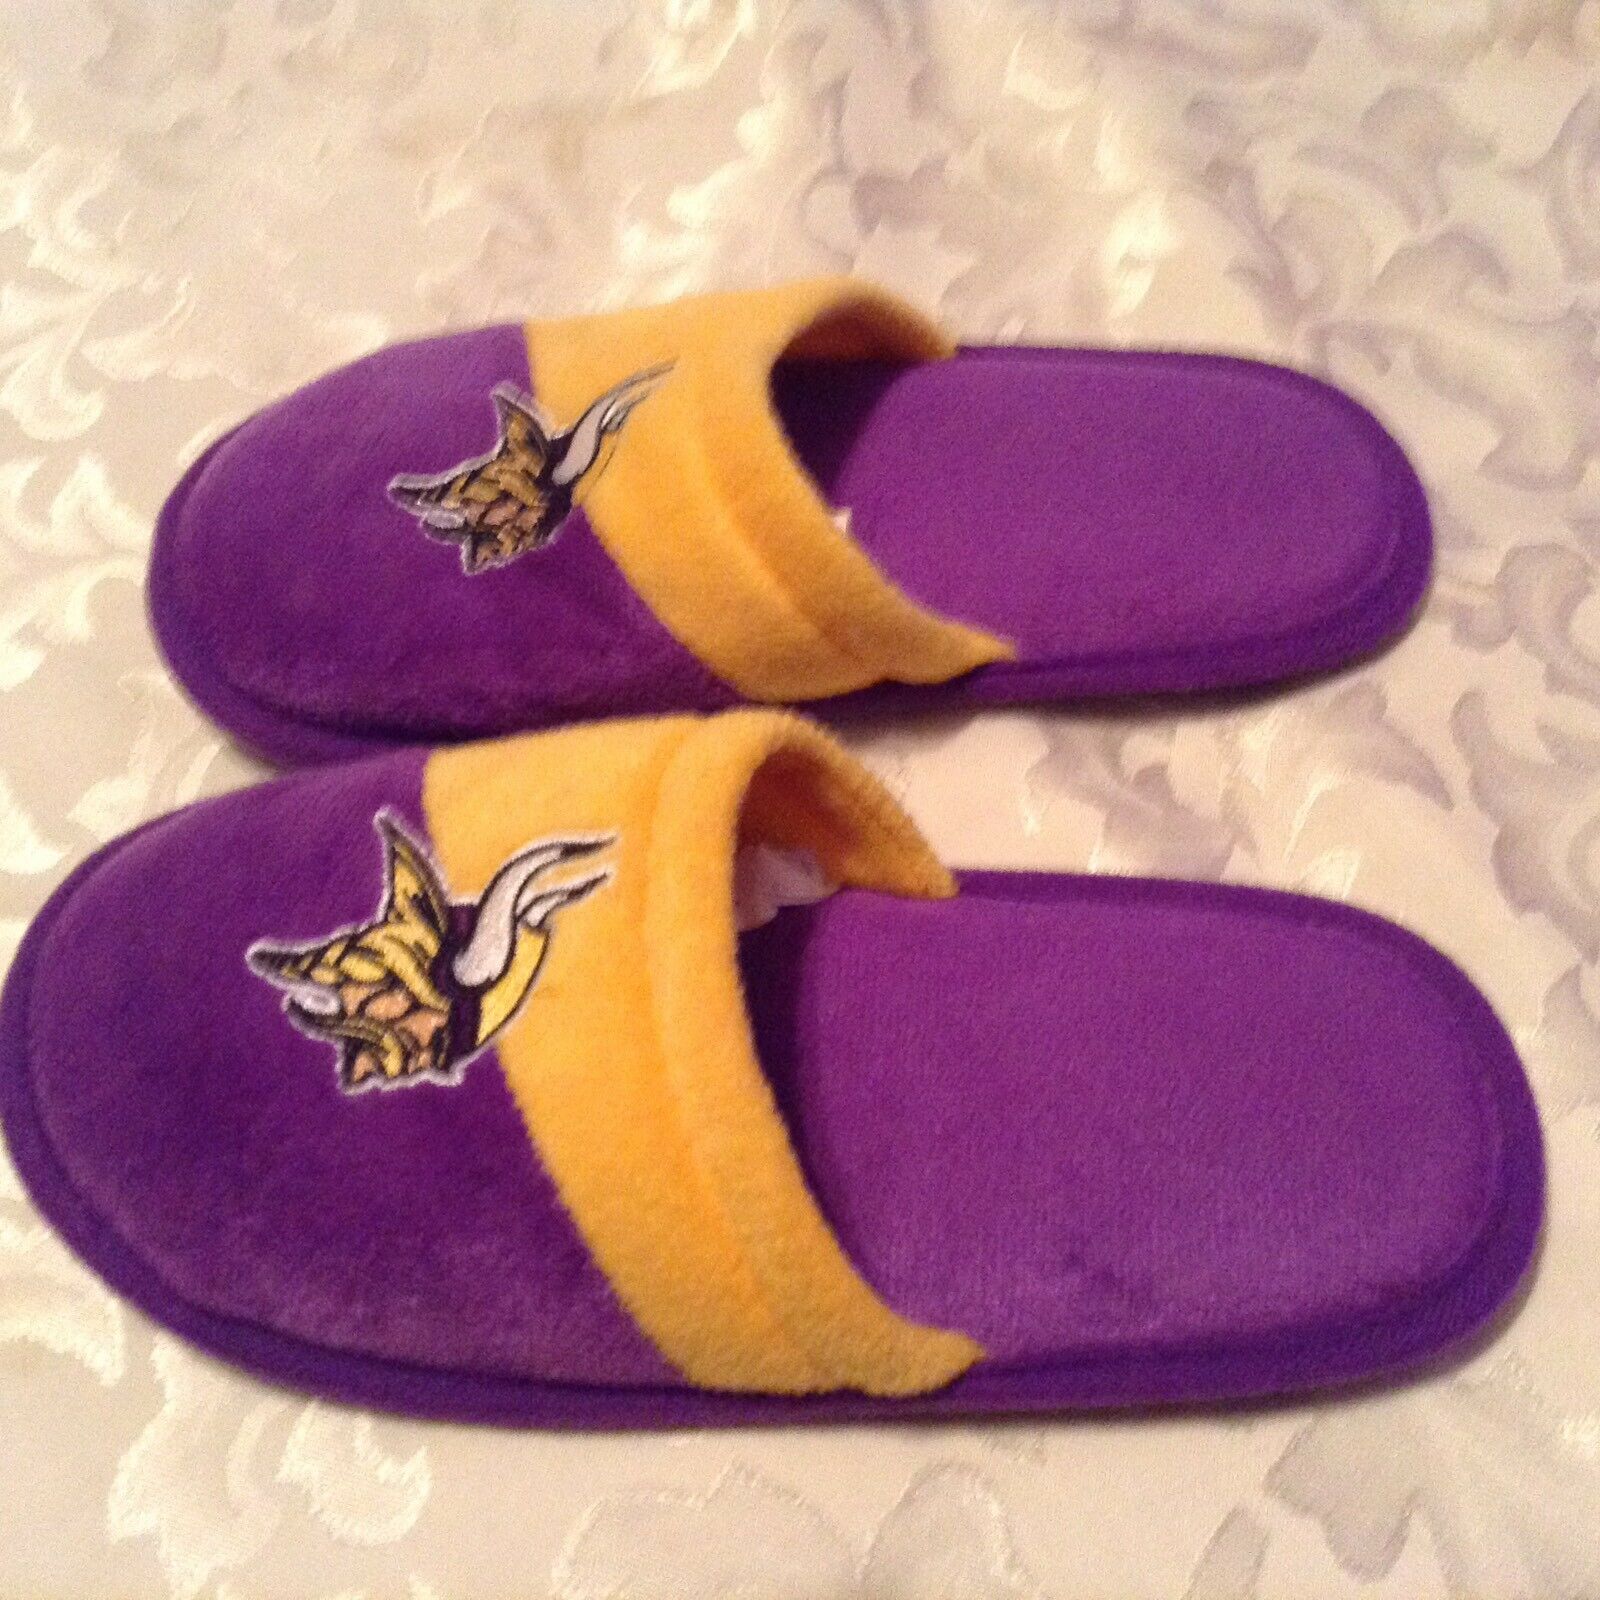 NFL Minnesota Vikings shoes Size youth 1 2 small plush house shoes slippers